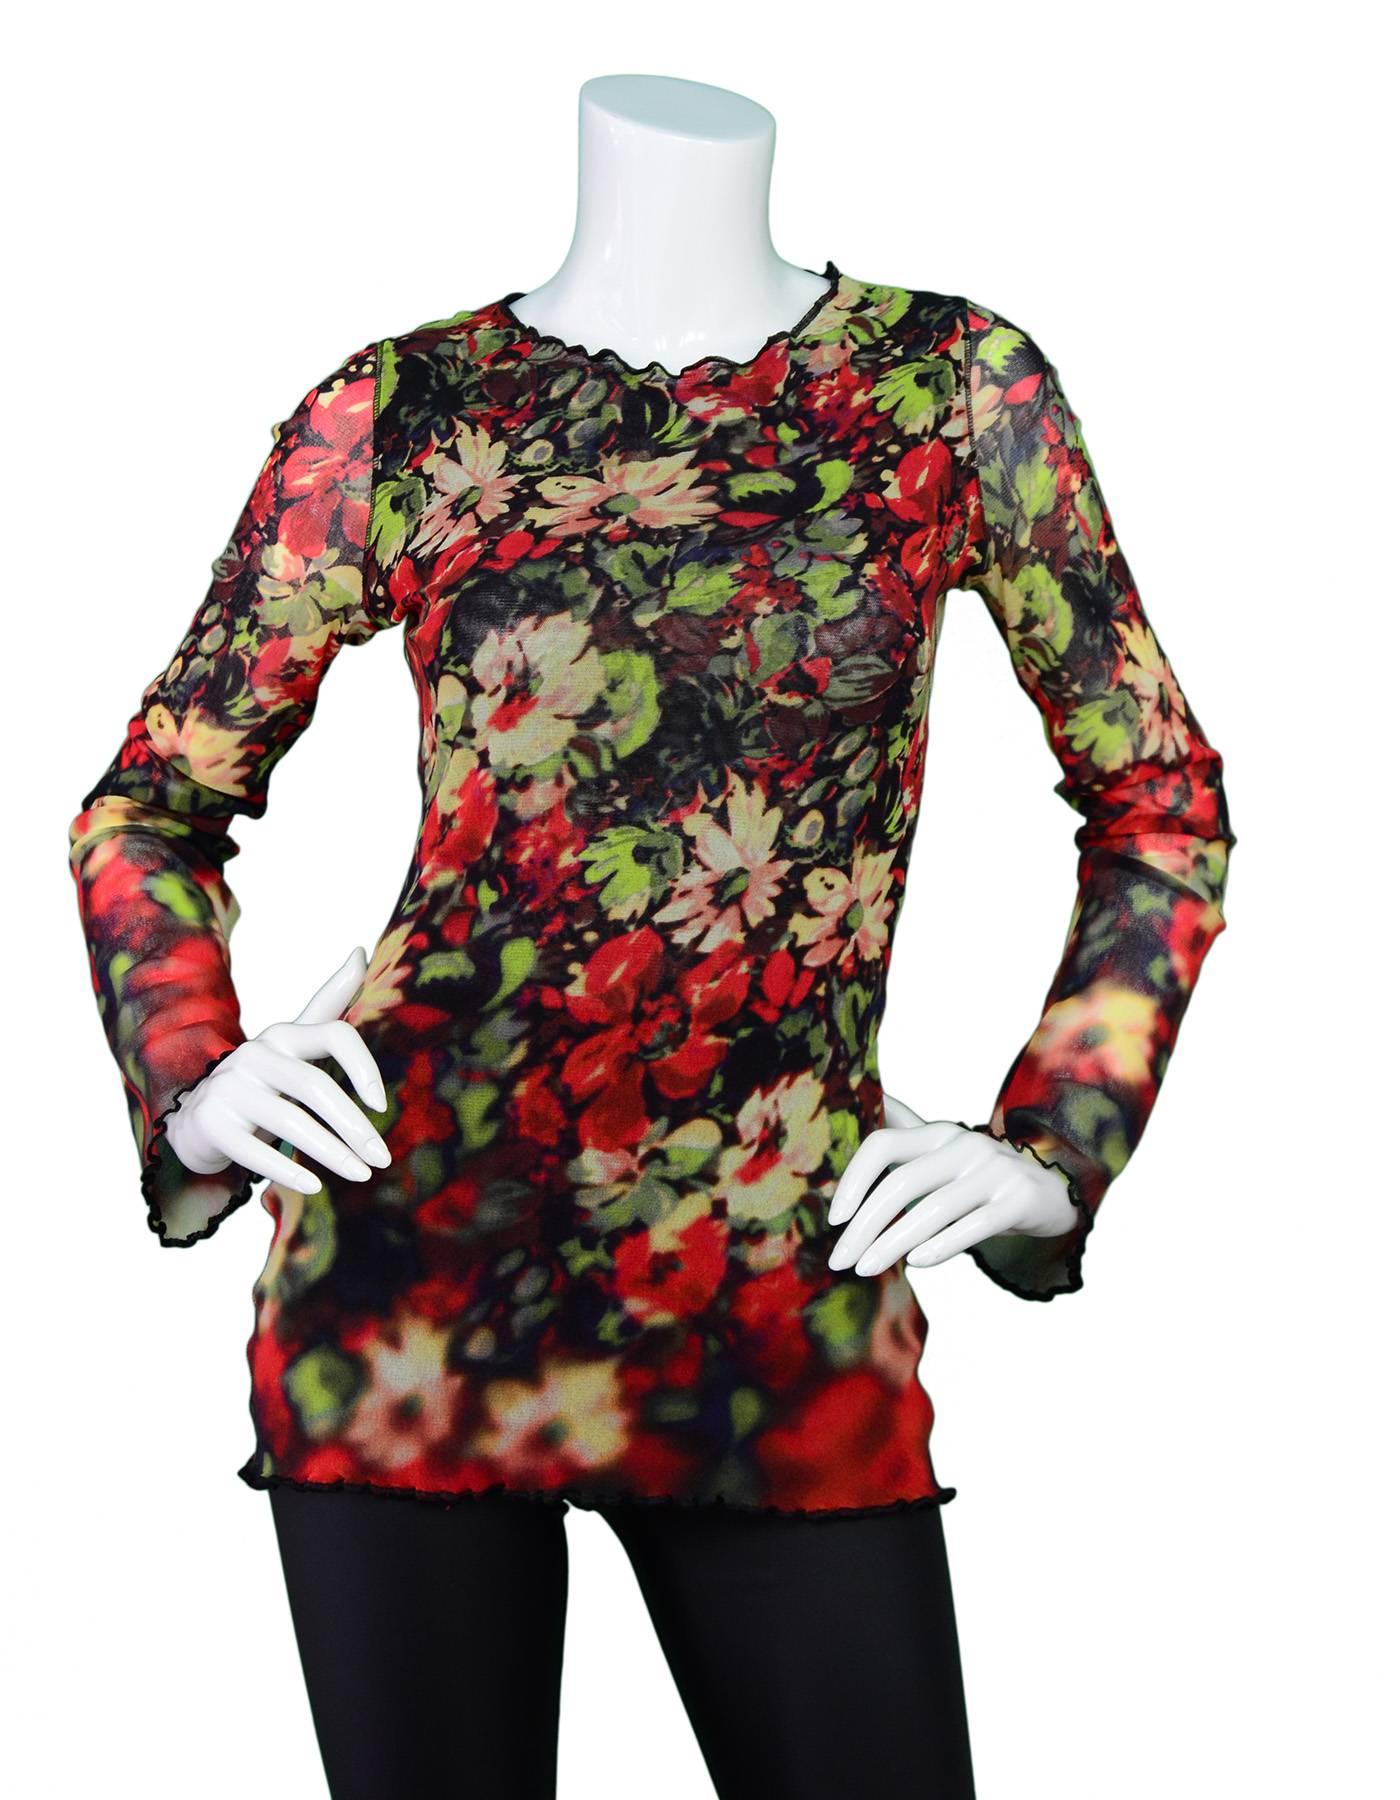 Jean Paul Gaultier Floral Longlseeve Top Sz L

Color: Black, red green
Composition: 100% Nylon
Lining: Black nylon
Closure/Opening: Pull over
Overall Condition: Excellent pre-owned condition
Marked Size: L
Shoulders: 13.5